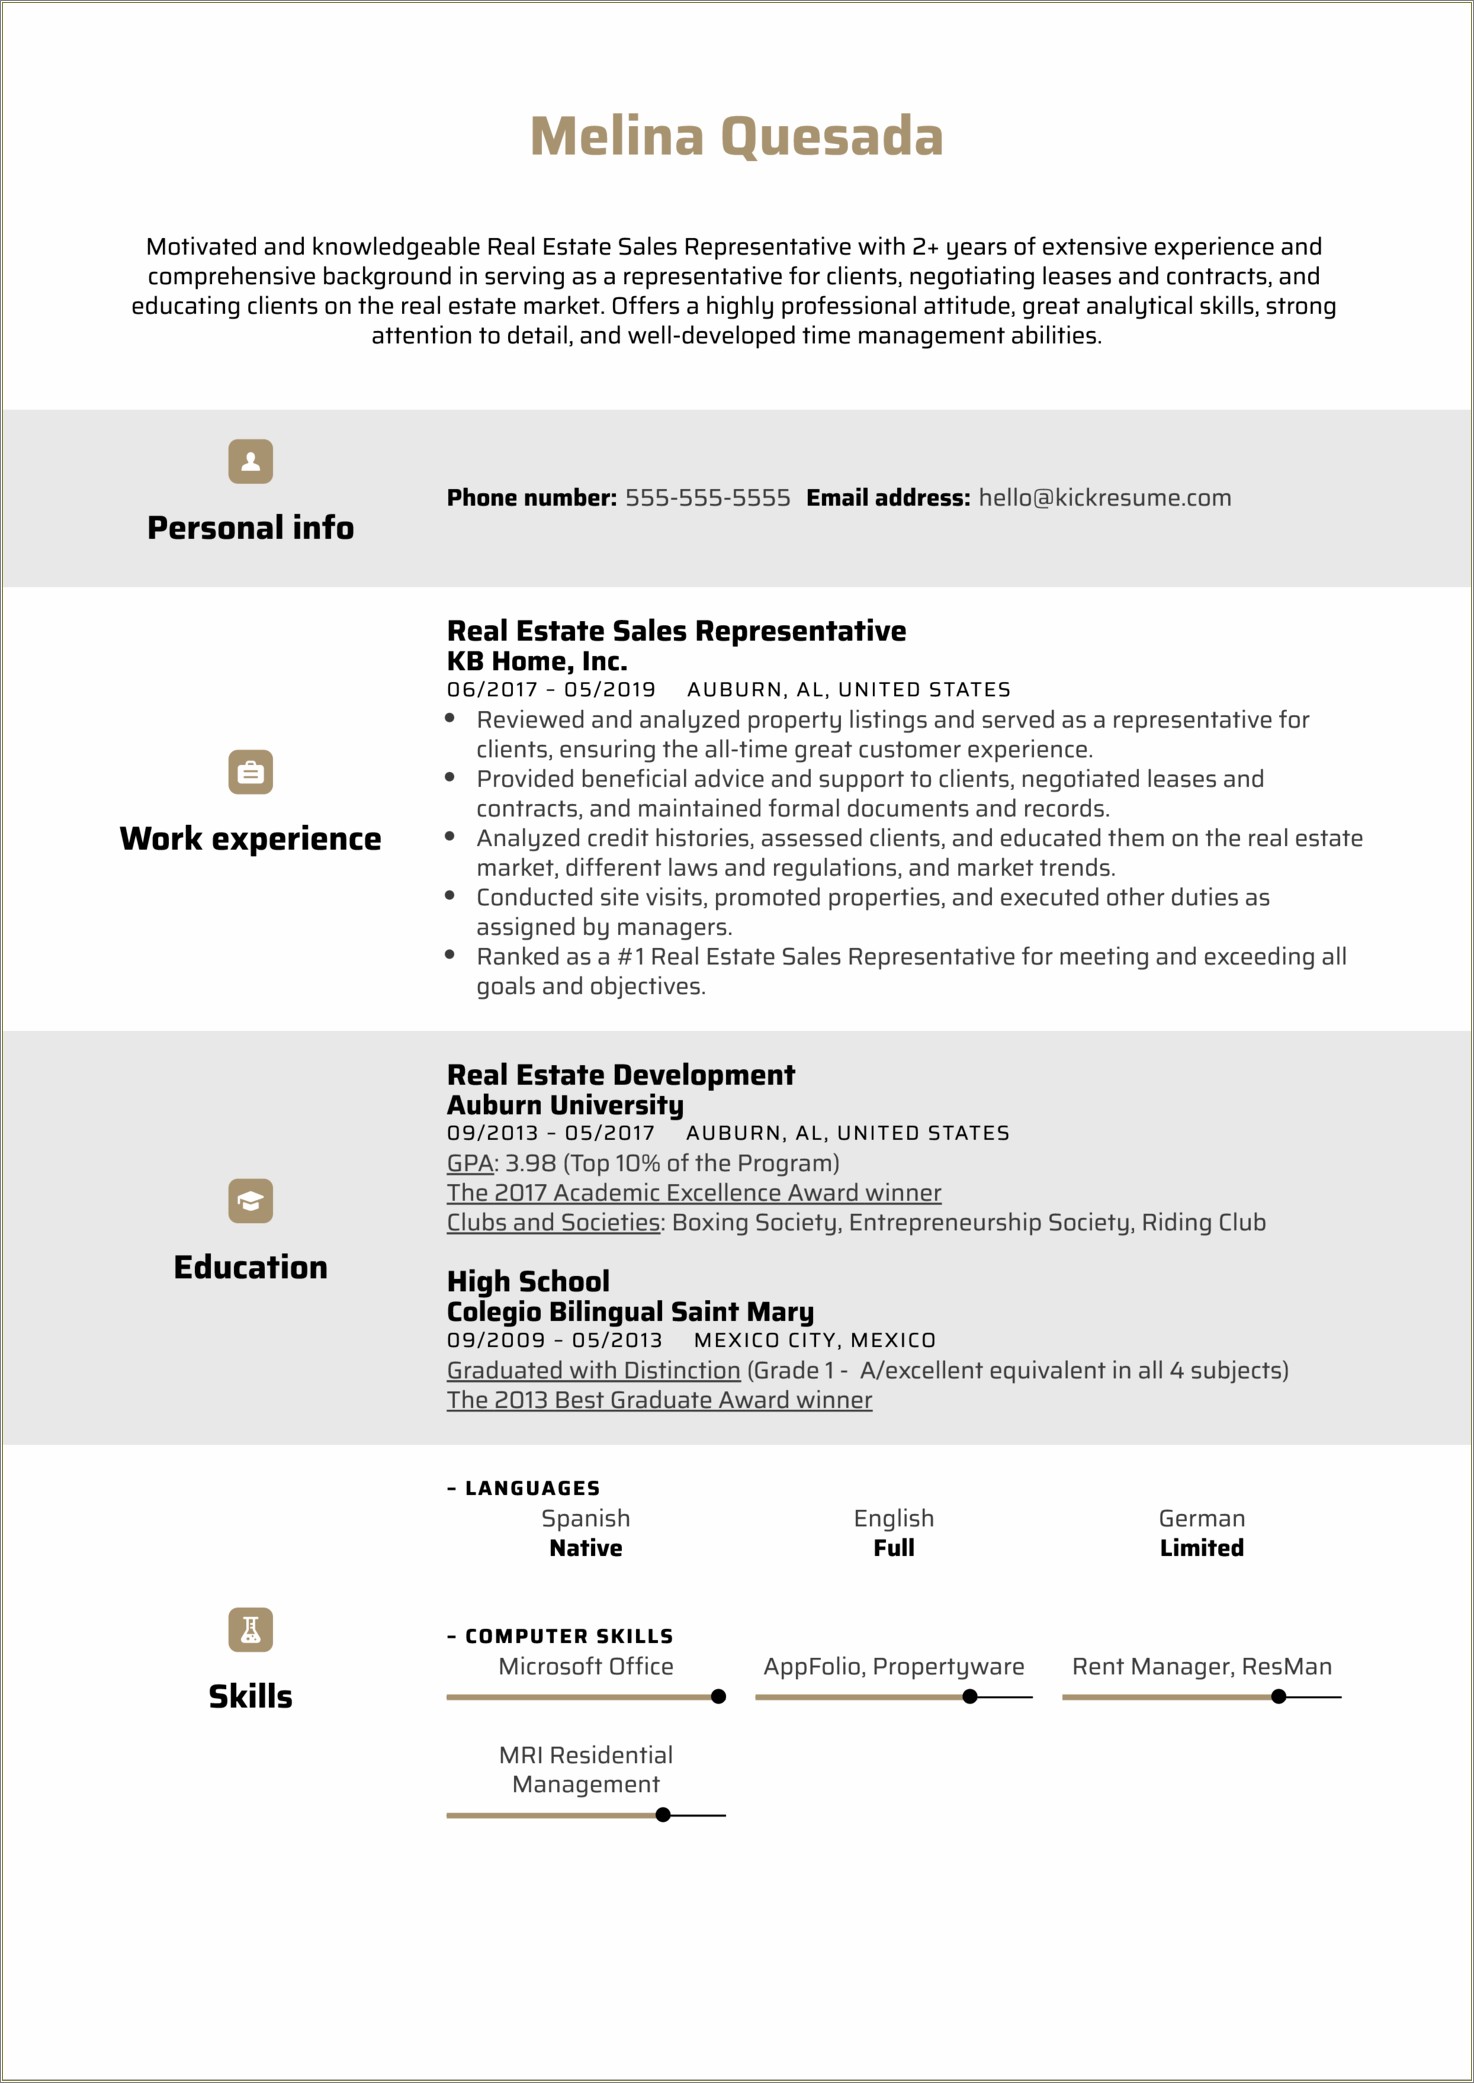 Professional Resume Of Sales Manager In Real Estate